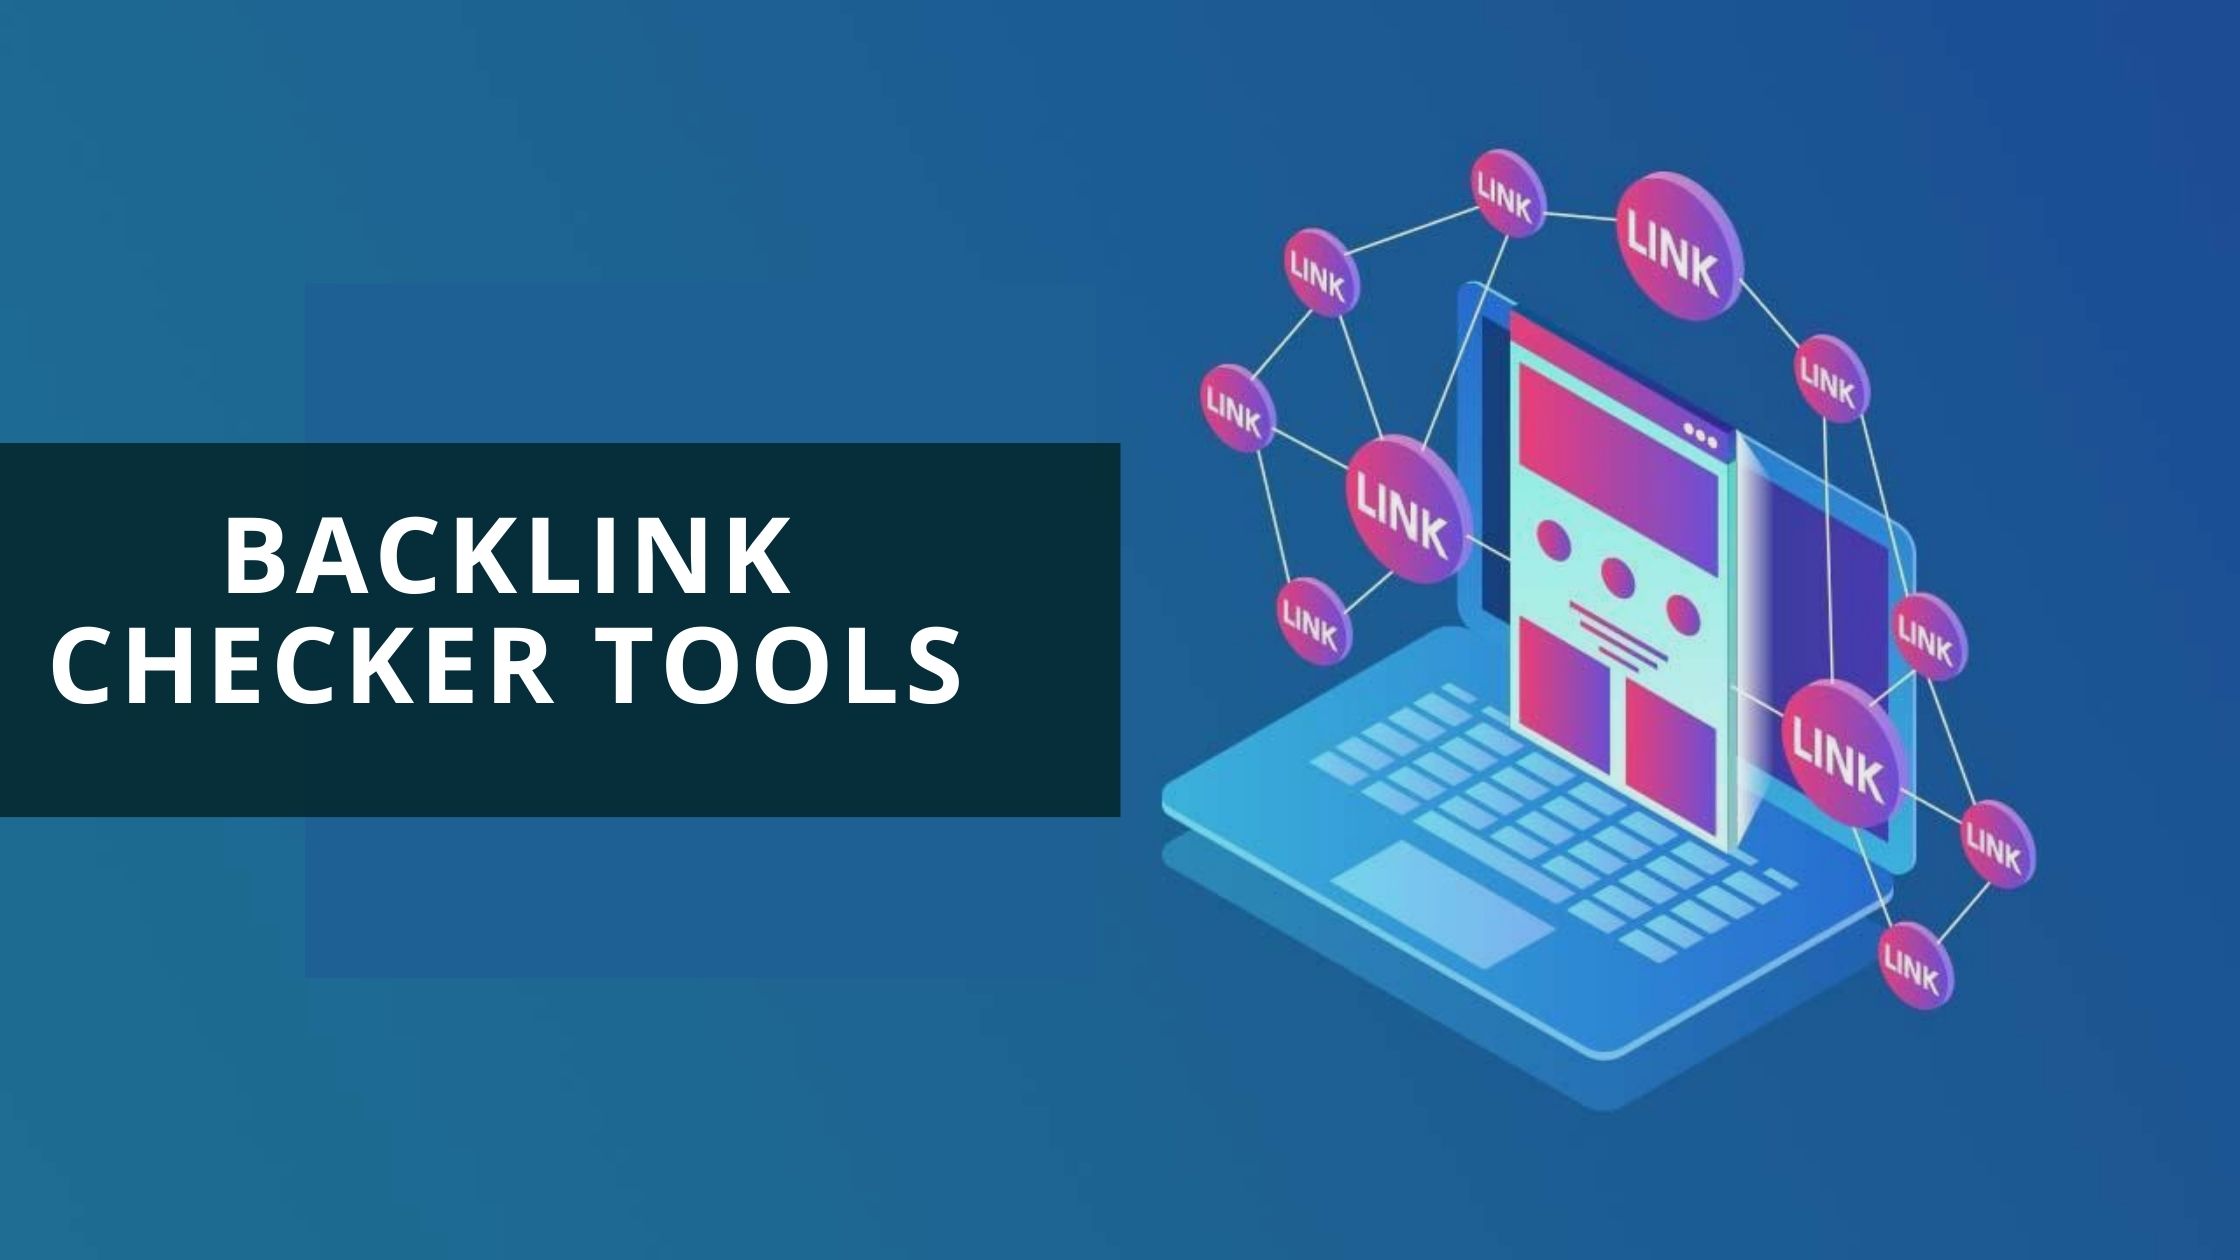 Top 10 Backlink Checker Tools - Free And Paid